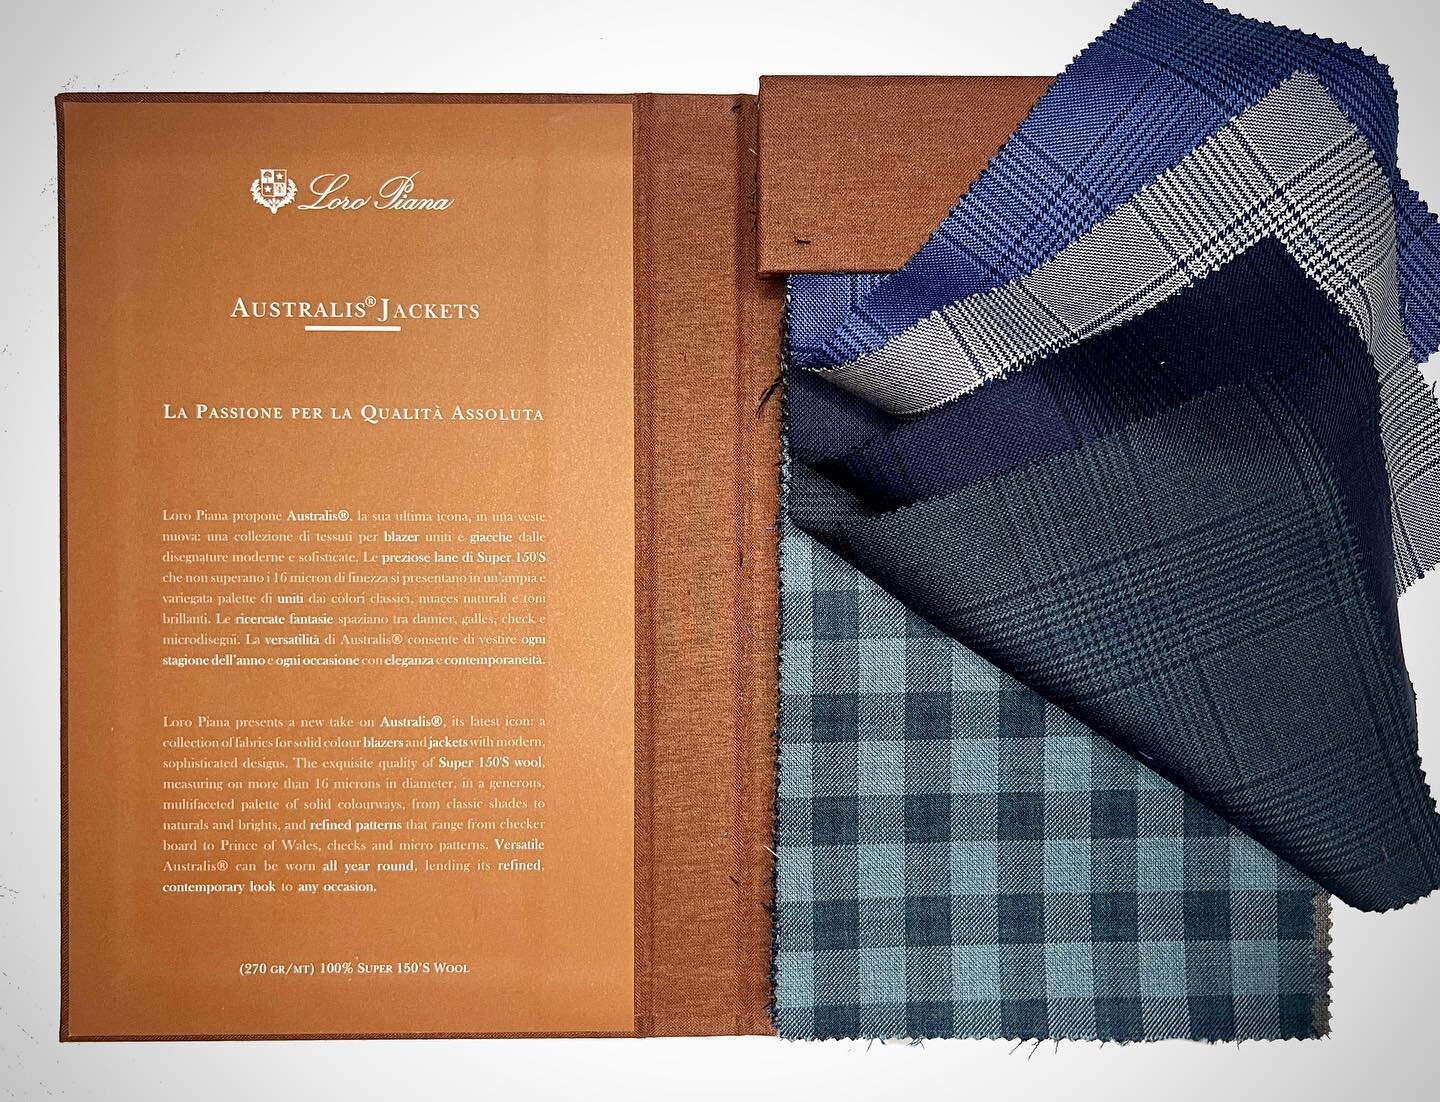 La Passione Per La Qualit&agrave; Assoluta

&ldquo;The Passion for Absolute Quality&rdquo;

@loropianafabrics new take on its latest icon, Australis. A gorgeous collection of fabrics for solid color blazers, and jackets with modern, sophisticated des